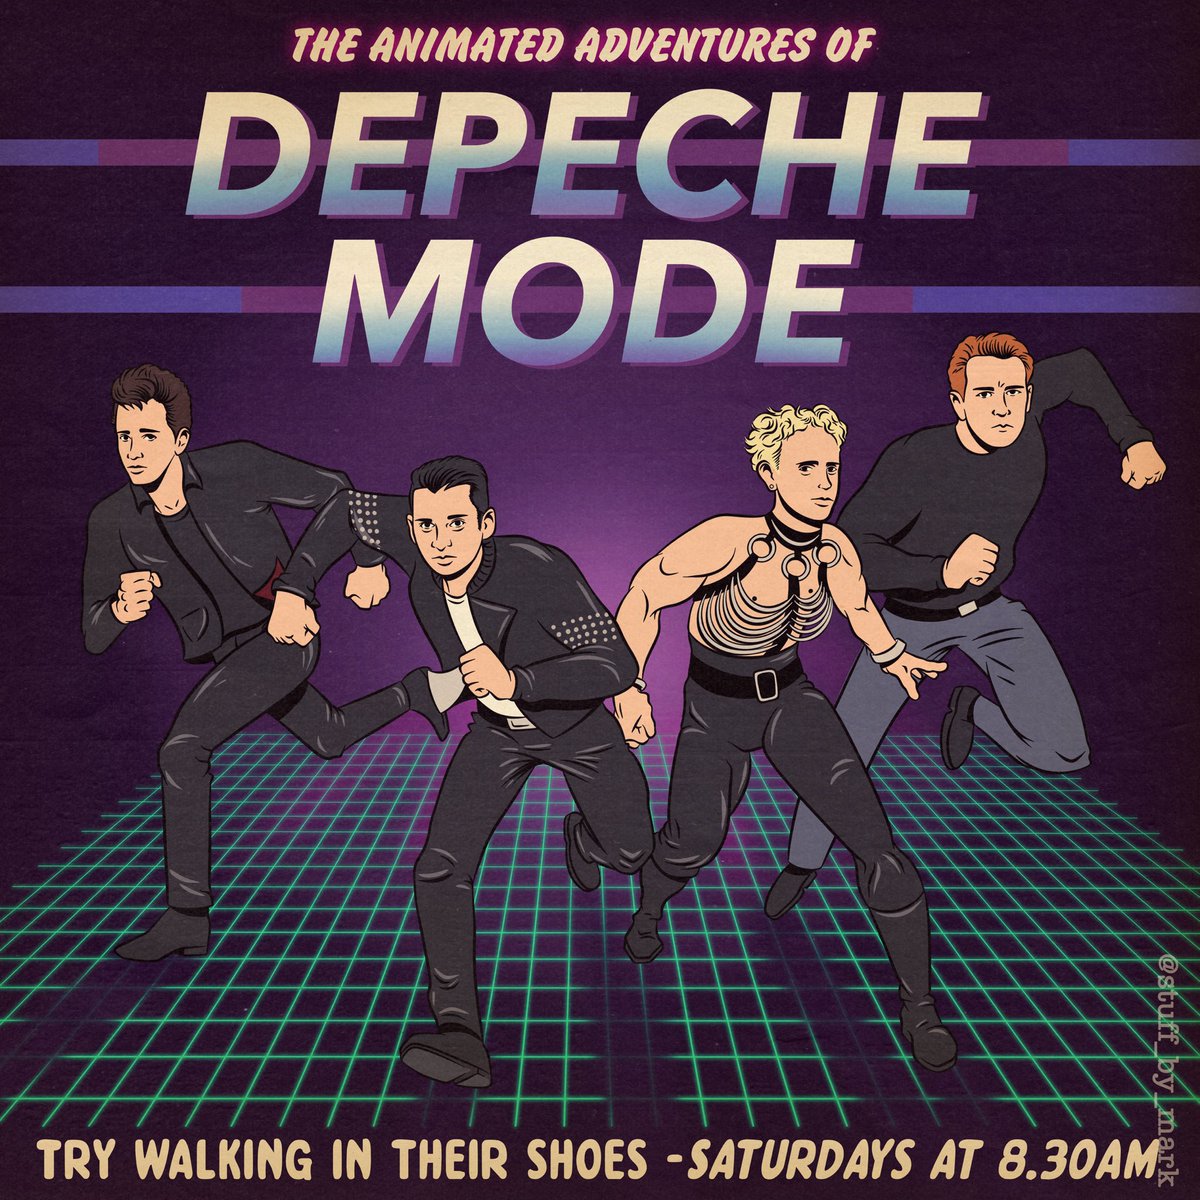 Another entry in the series. This time one of the great forgotten 1980s kids cartoon shows, ‘The Animated Adventutes Of Depeche Mode’.